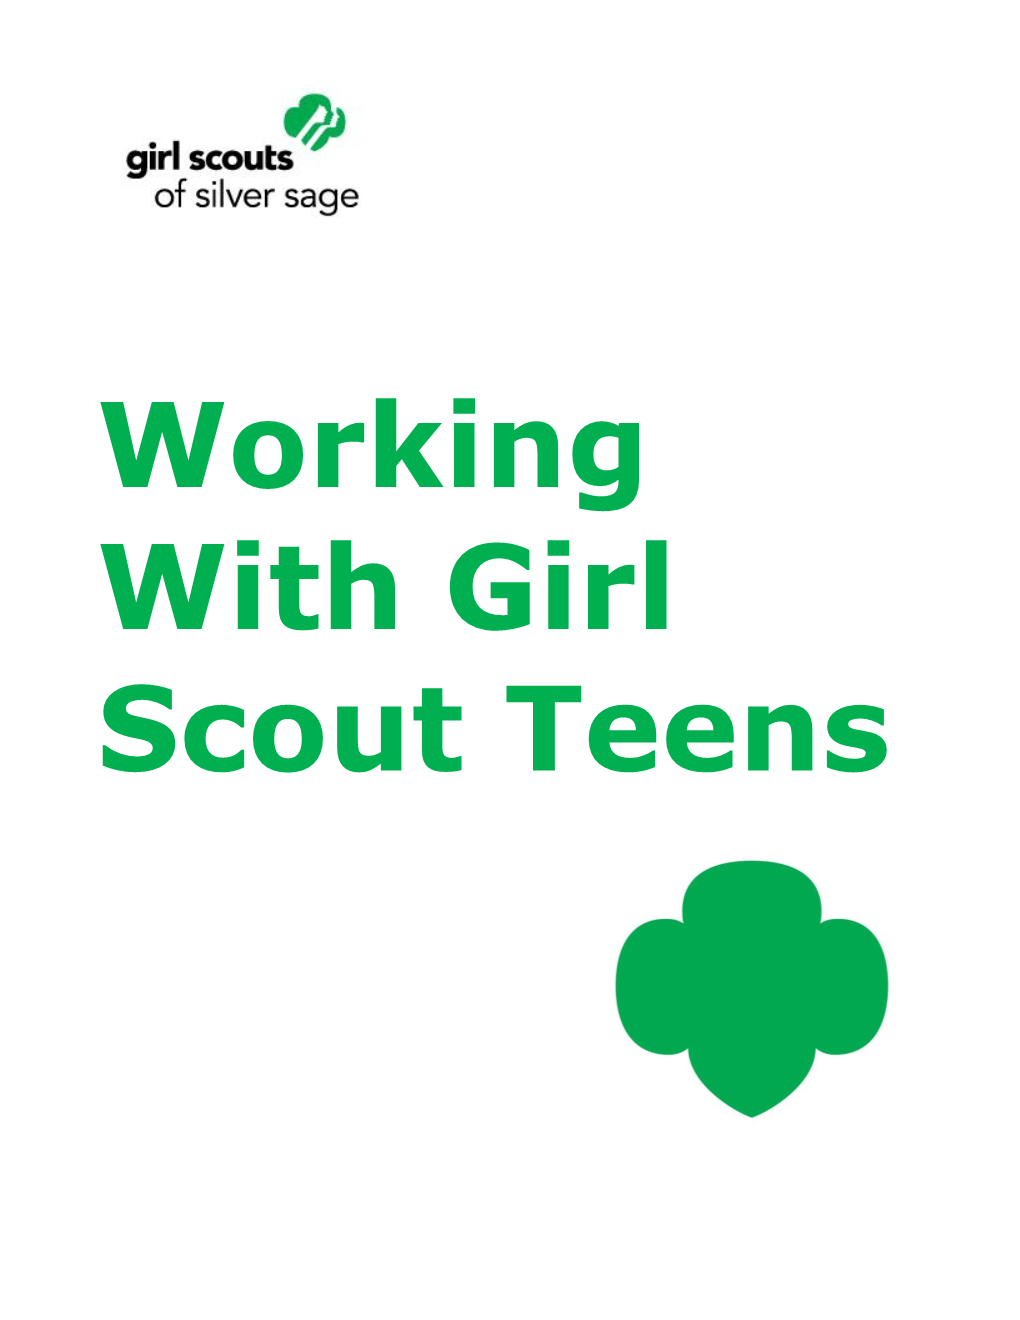 Working with Girl Scout Teens